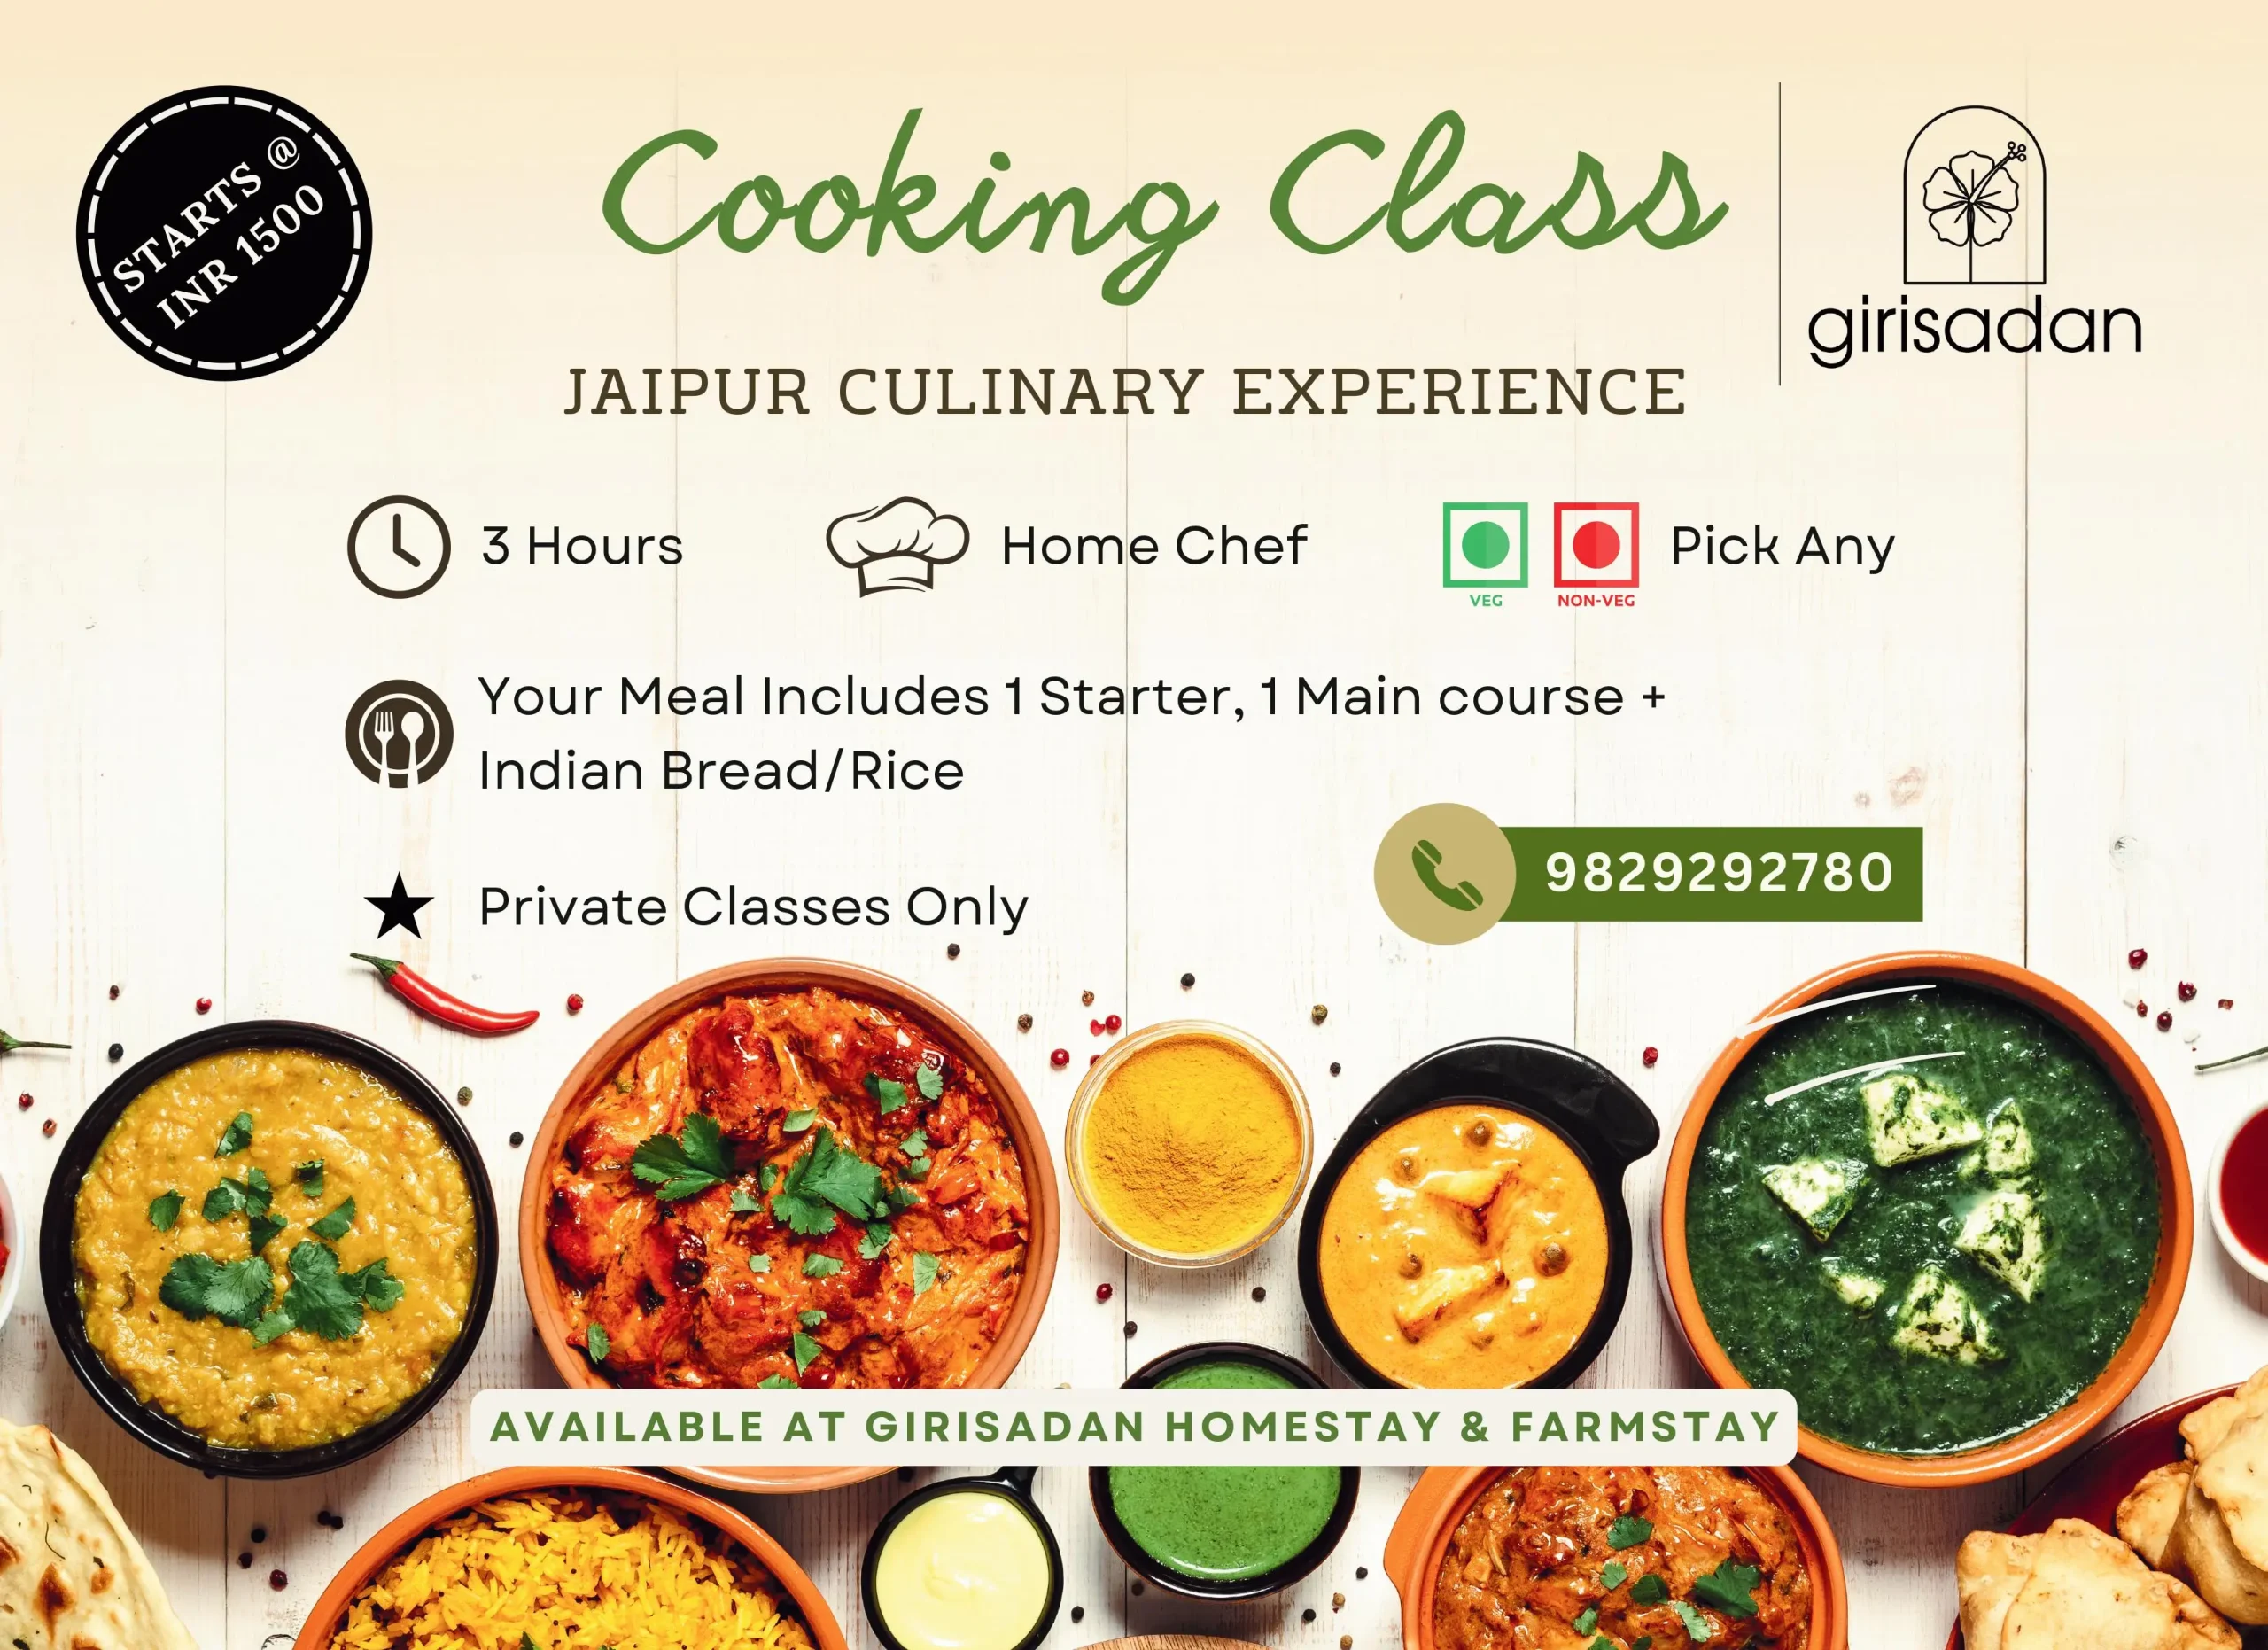 Cooking classes at Girisadan Homestay and Farmstay in Jaipur